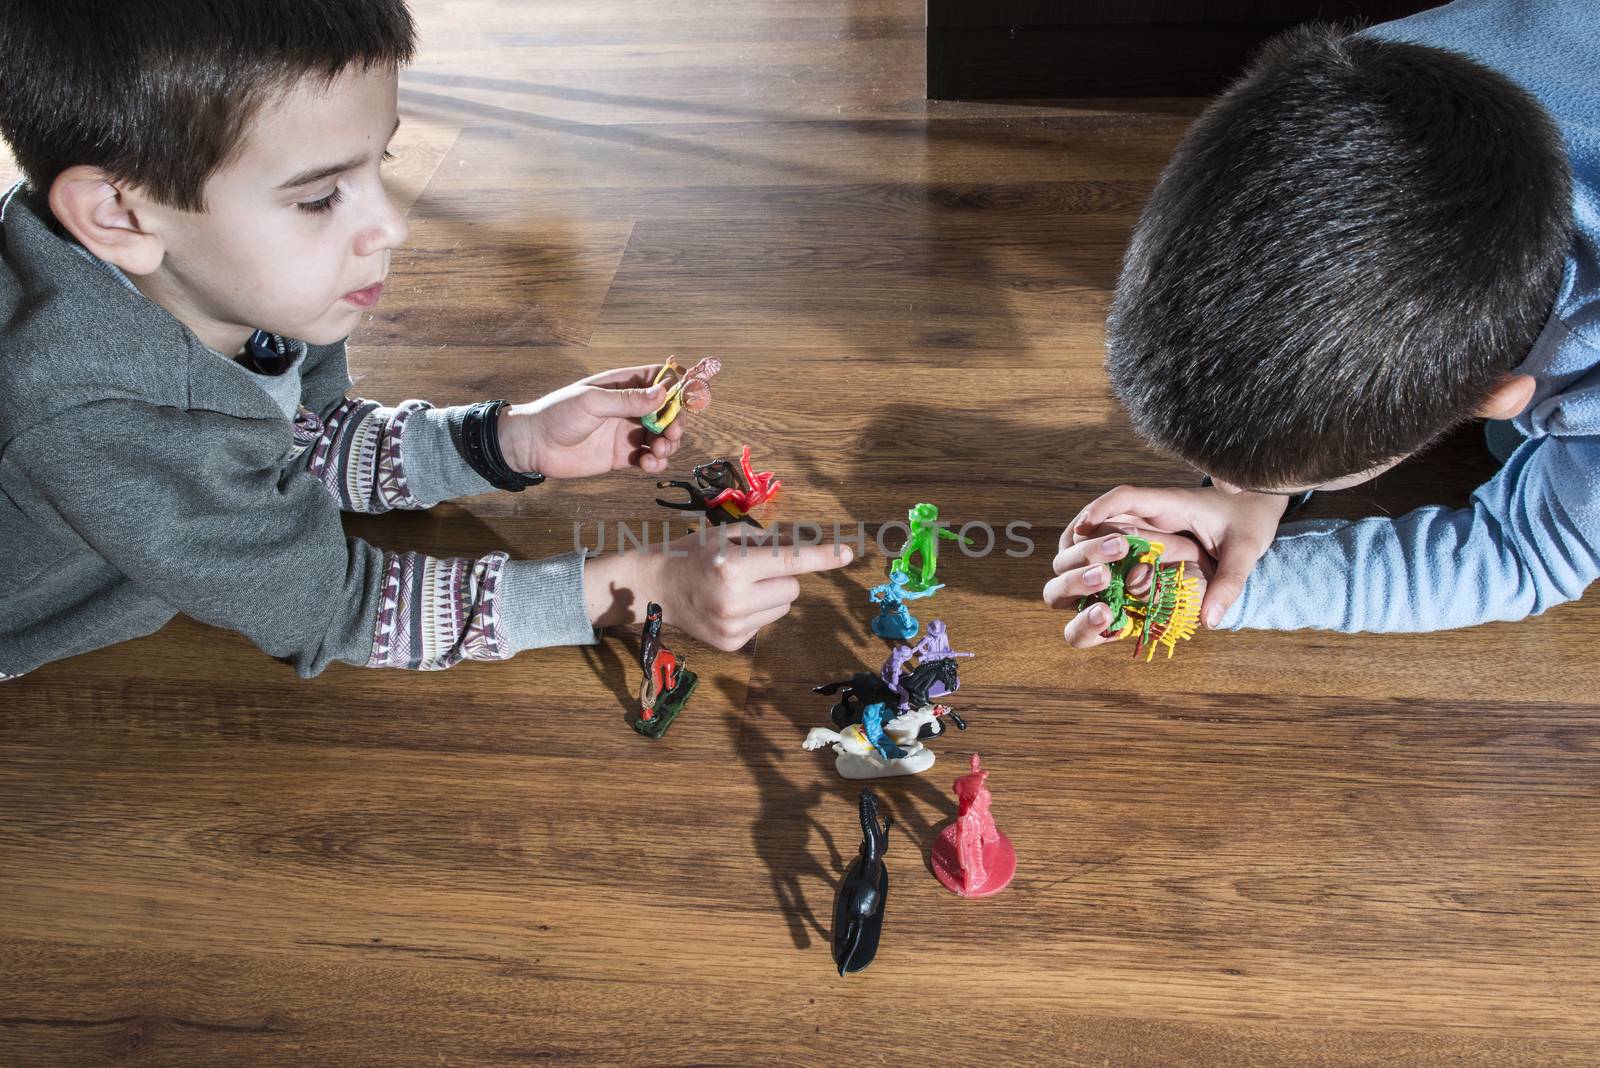 Childs playing with small vintage toys on the floor